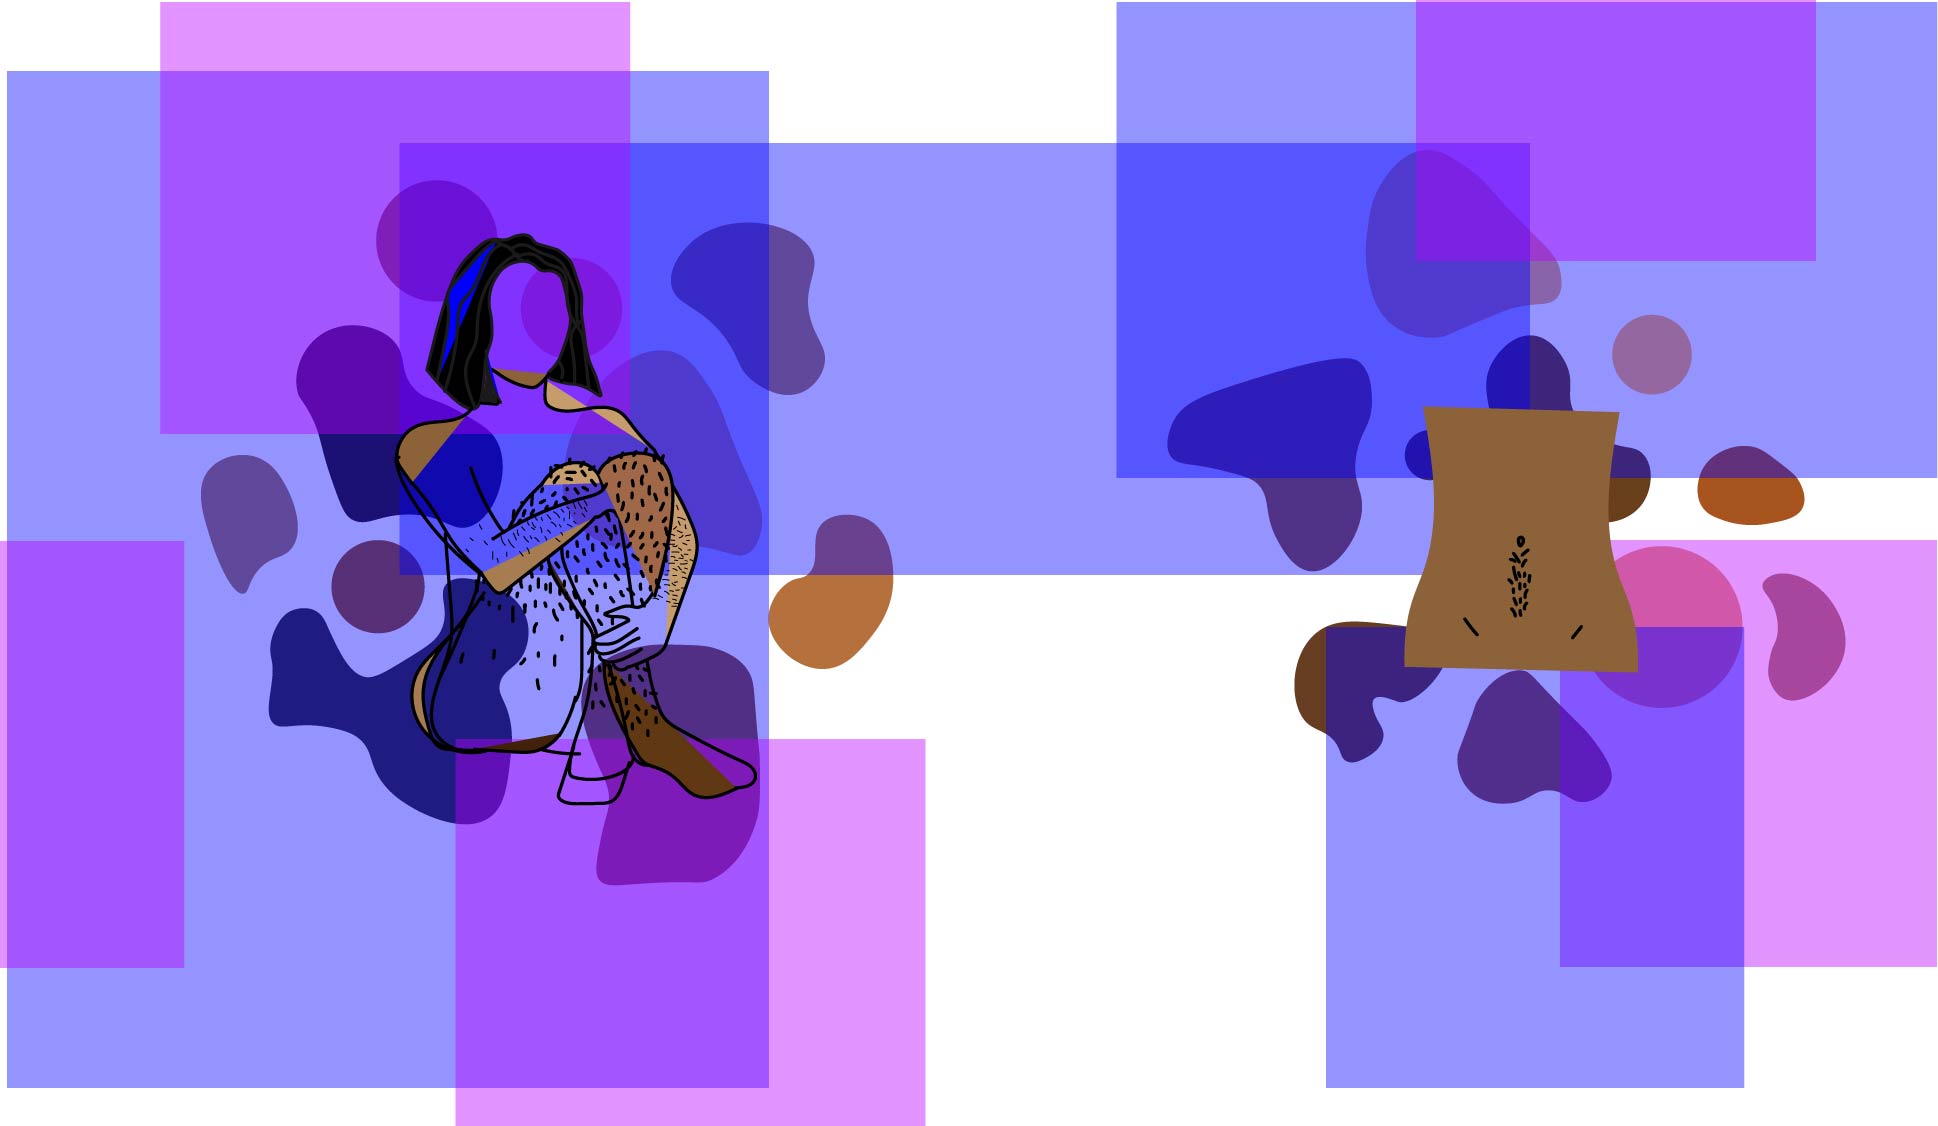 On the left, a faceless person sits with their legs crossed, hair noticeably covering their forearms and legs. On the right is a closeup of a hairy human torso. Behind both images are overlapping blue and purple rectangles.